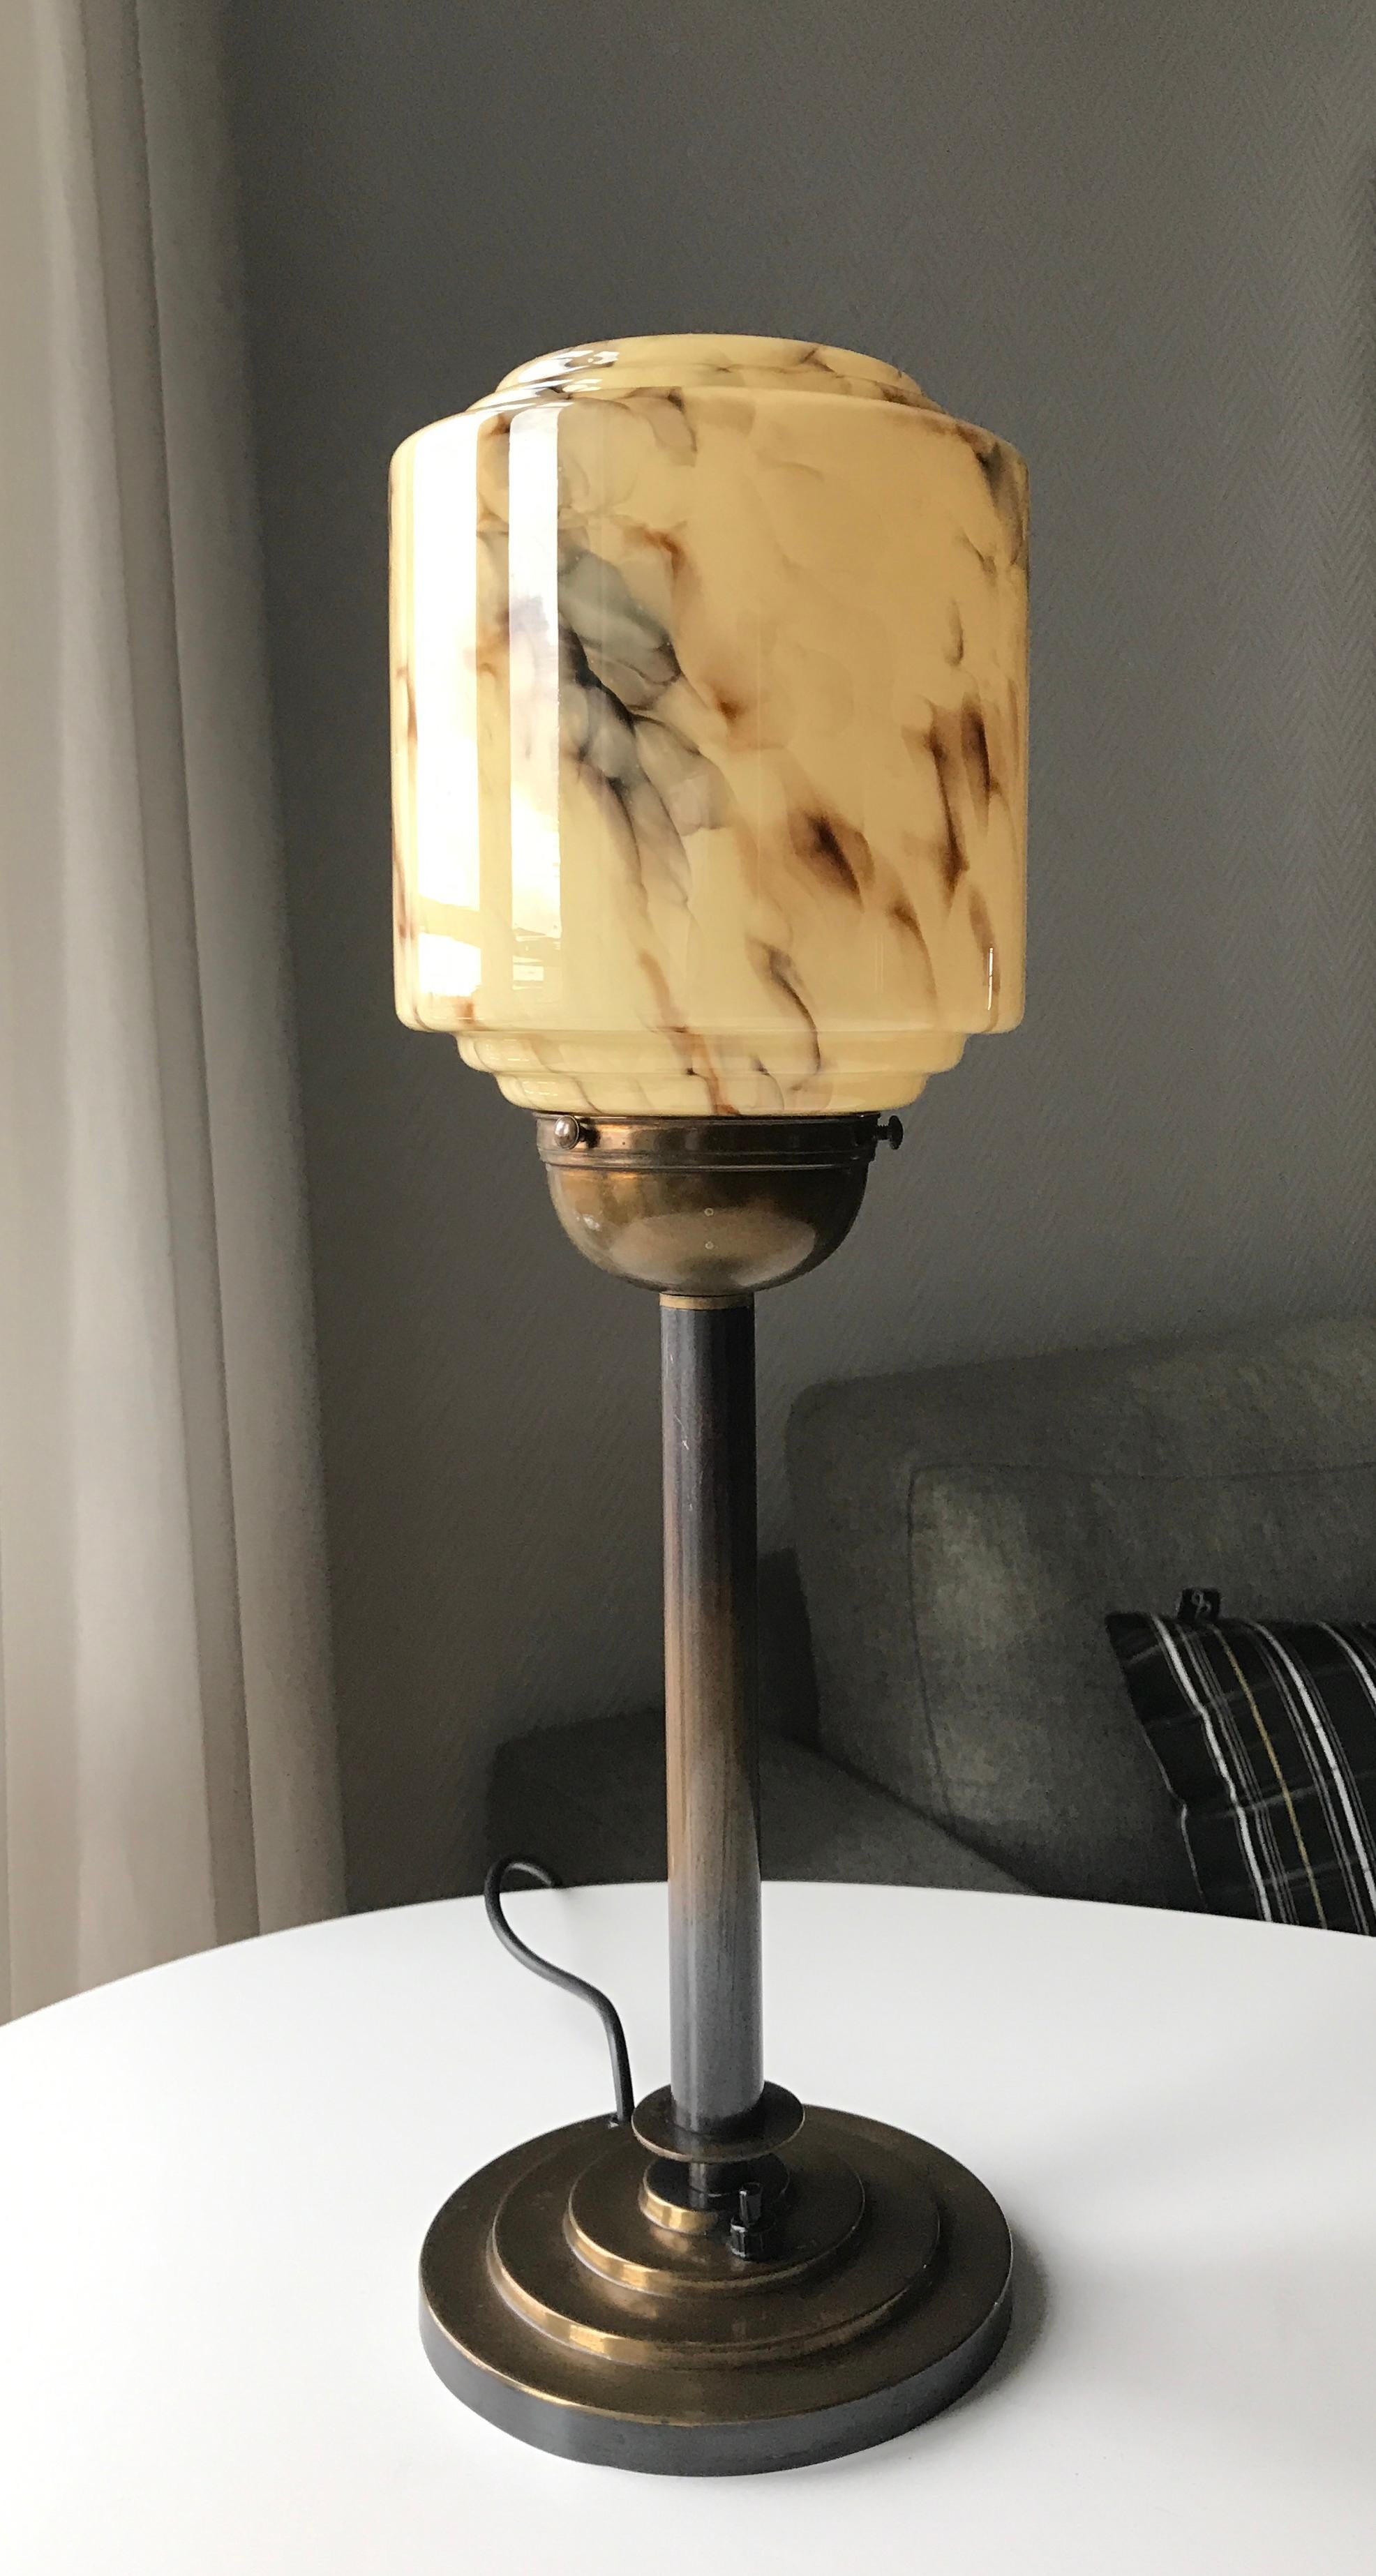 Danish early 20th century Art Deco table lamp manufactured by Voss. Typically design from the period between early 1920s-end 1950s. Dark patinated brass plinth with on/off switch. Tube in brass with patinated sunburst effect fading from dark to